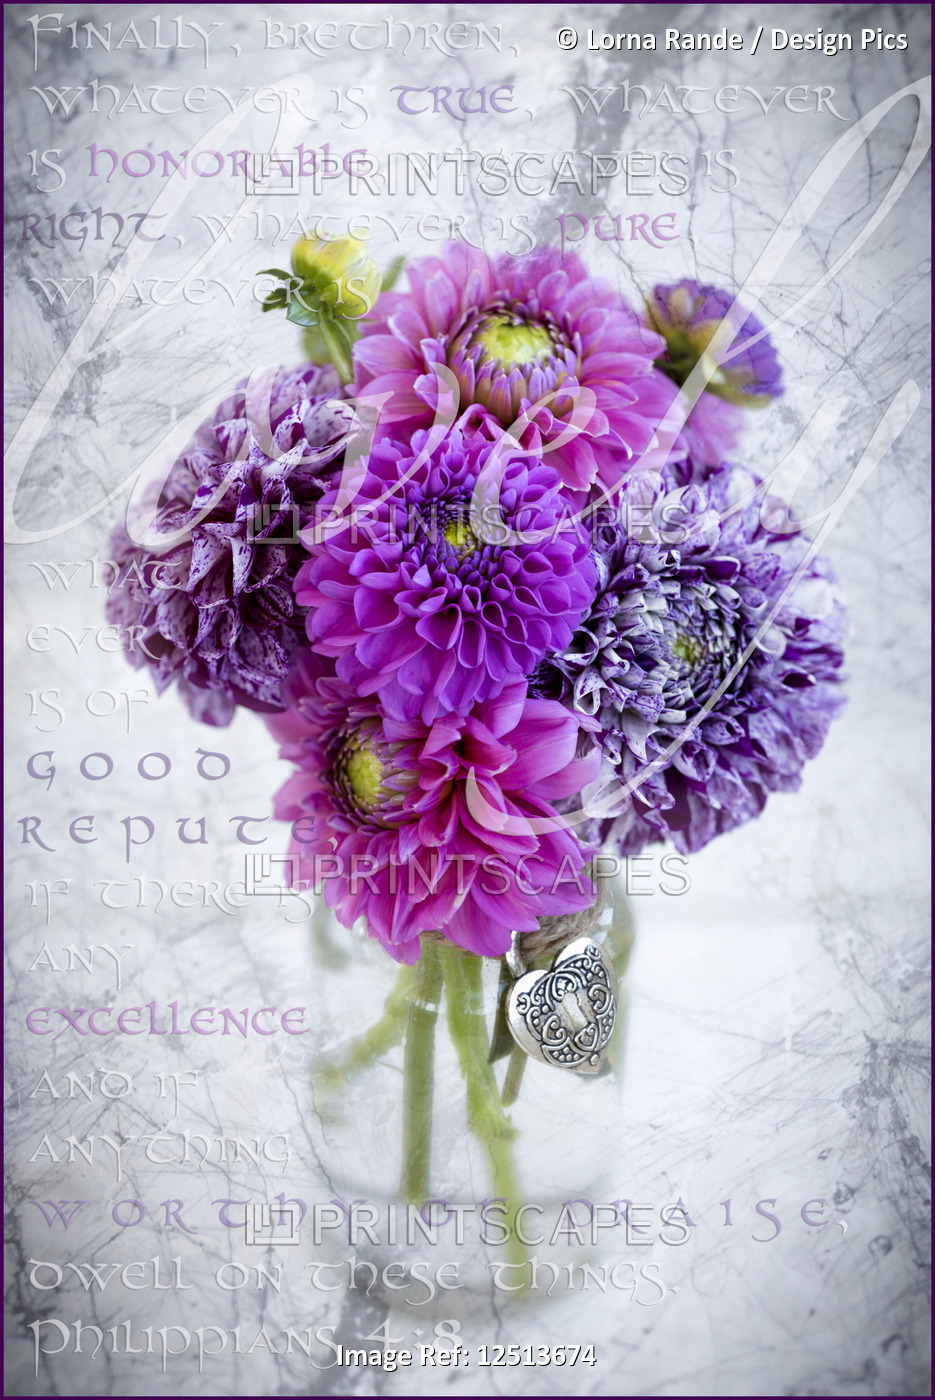 Marbled purple dahlia's arranged in a glass jar with Philippians 4:8 written in ...